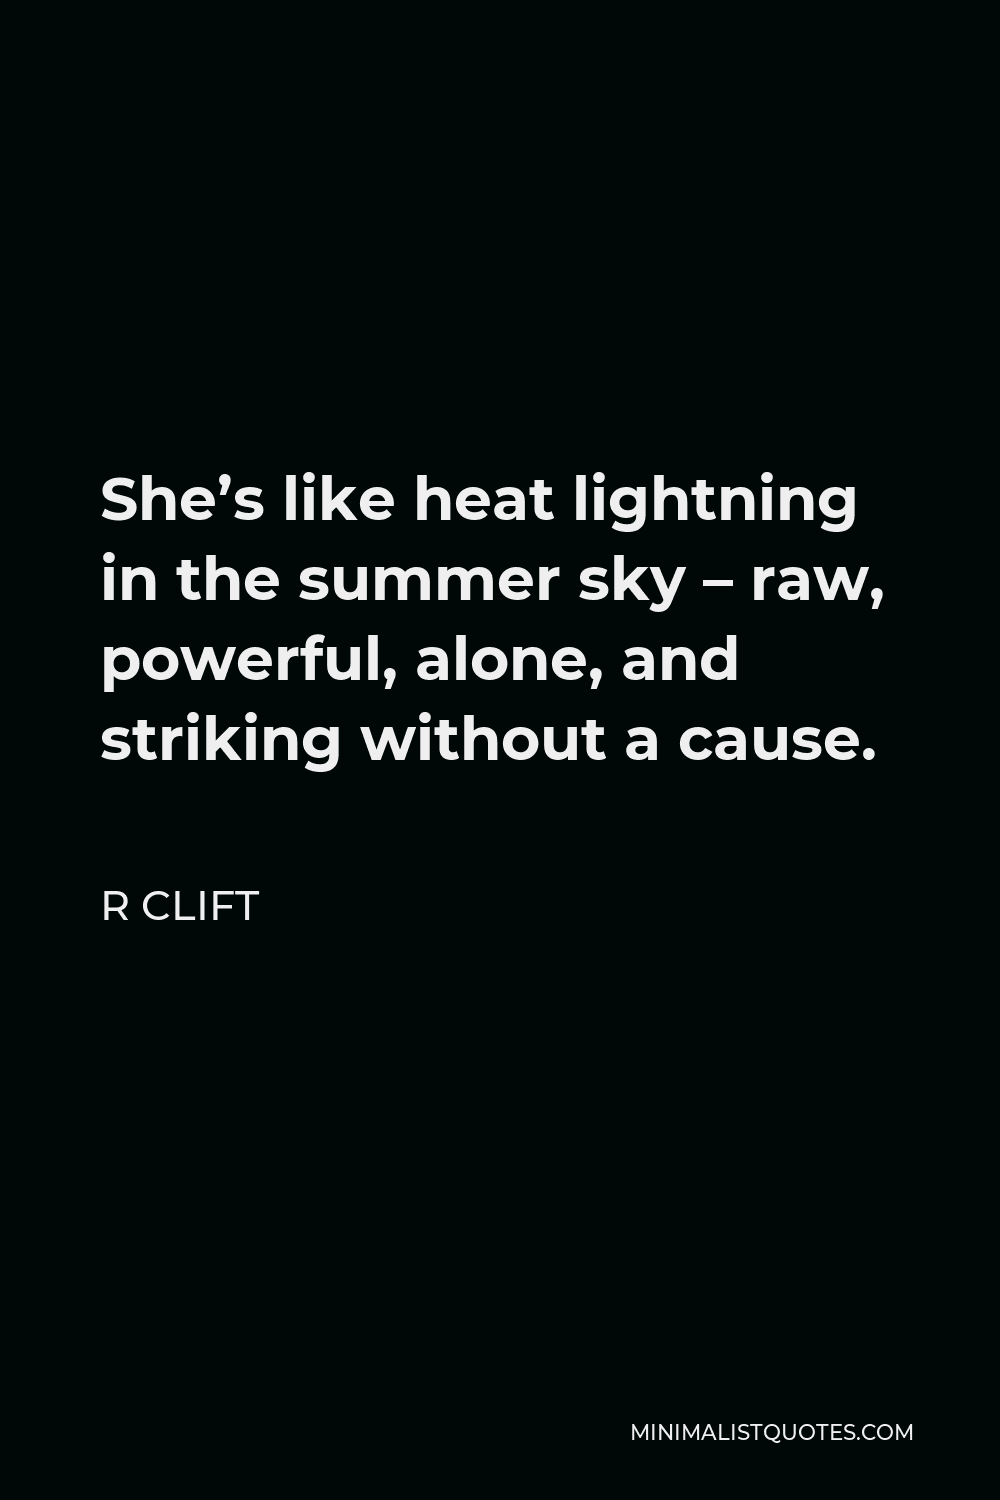 R Clift Quote - She’s like heat lightning in the summer sky – raw, powerful, alone, and striking without a cause.